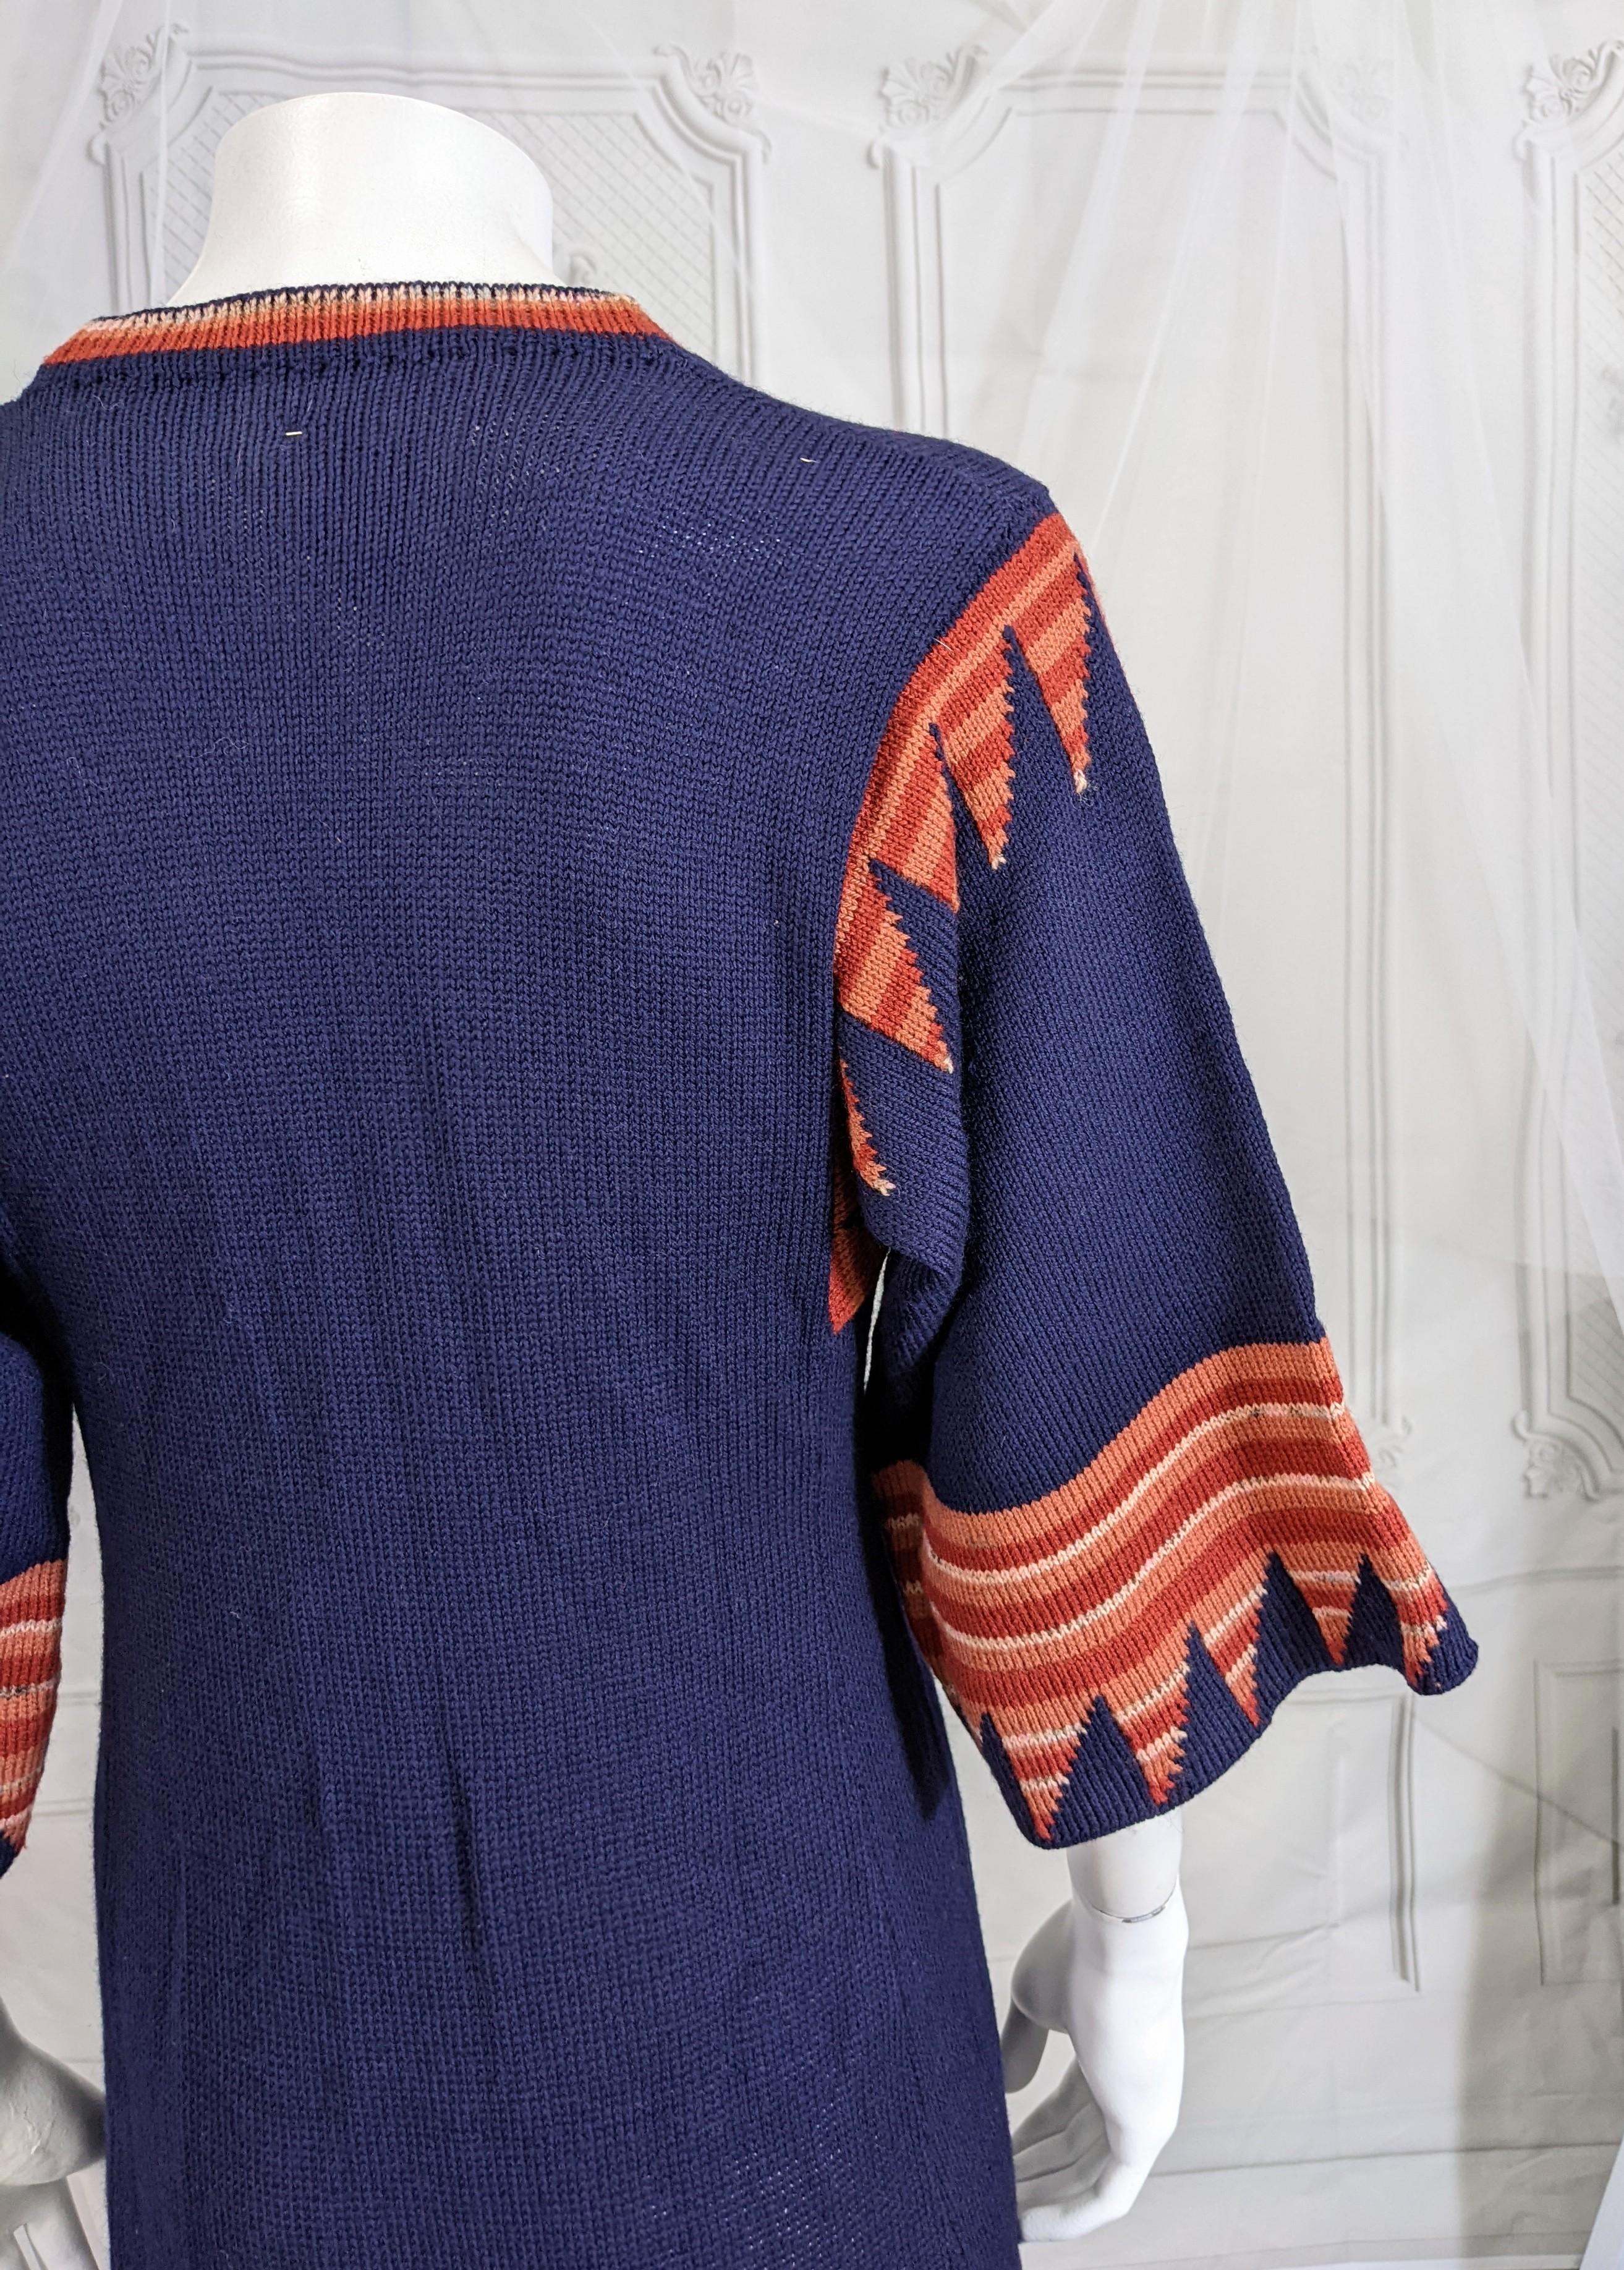 Wool Intarsia Knit 1970's Dress, Ulla Heathcoat, UK In Good Condition For Sale In New York, NY